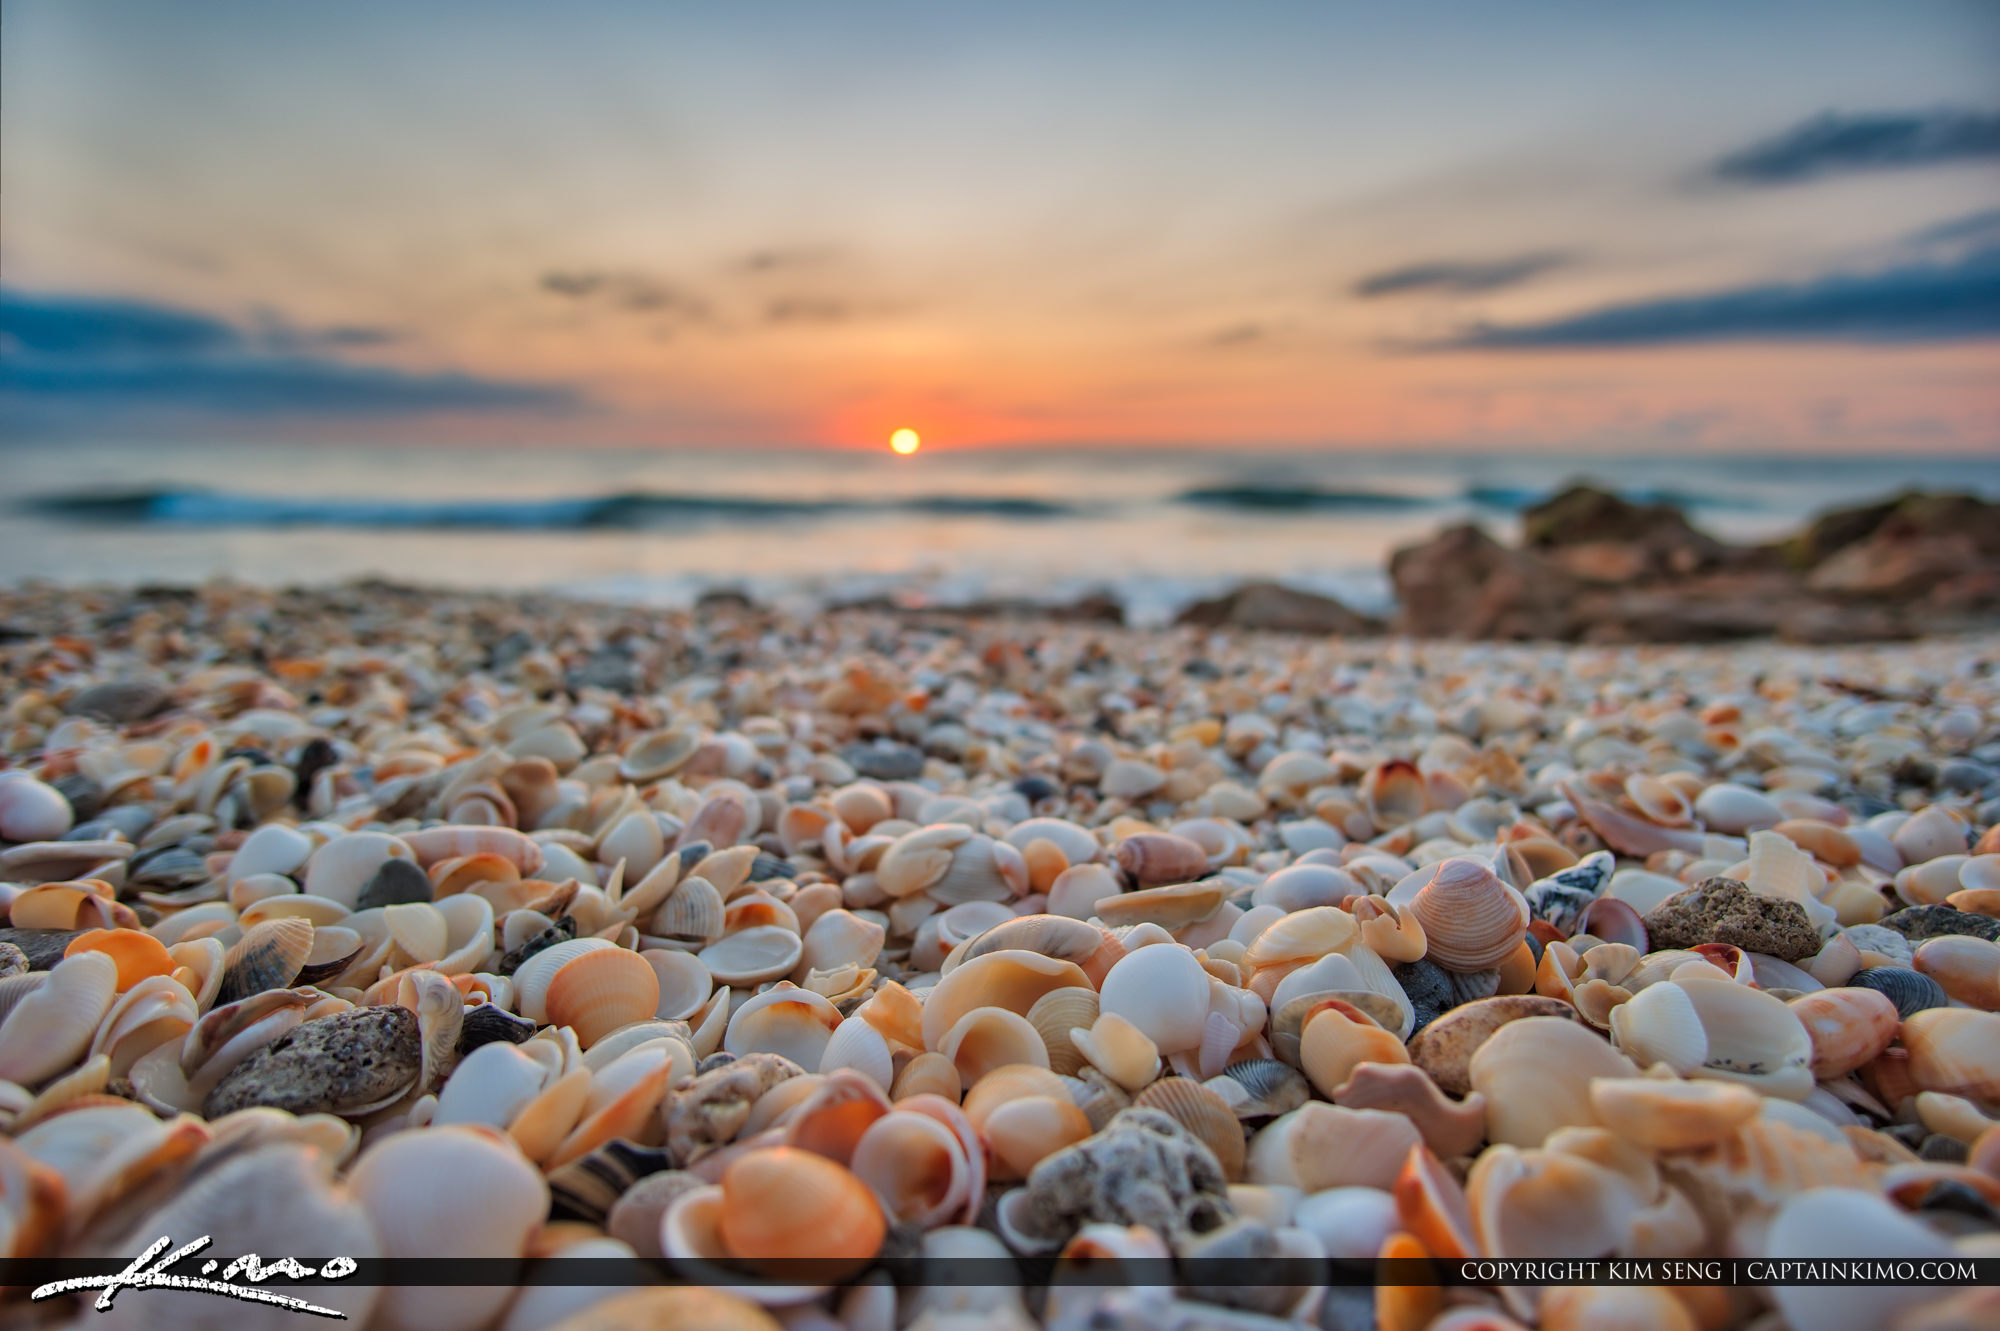 Sunrise with Shells at Beach